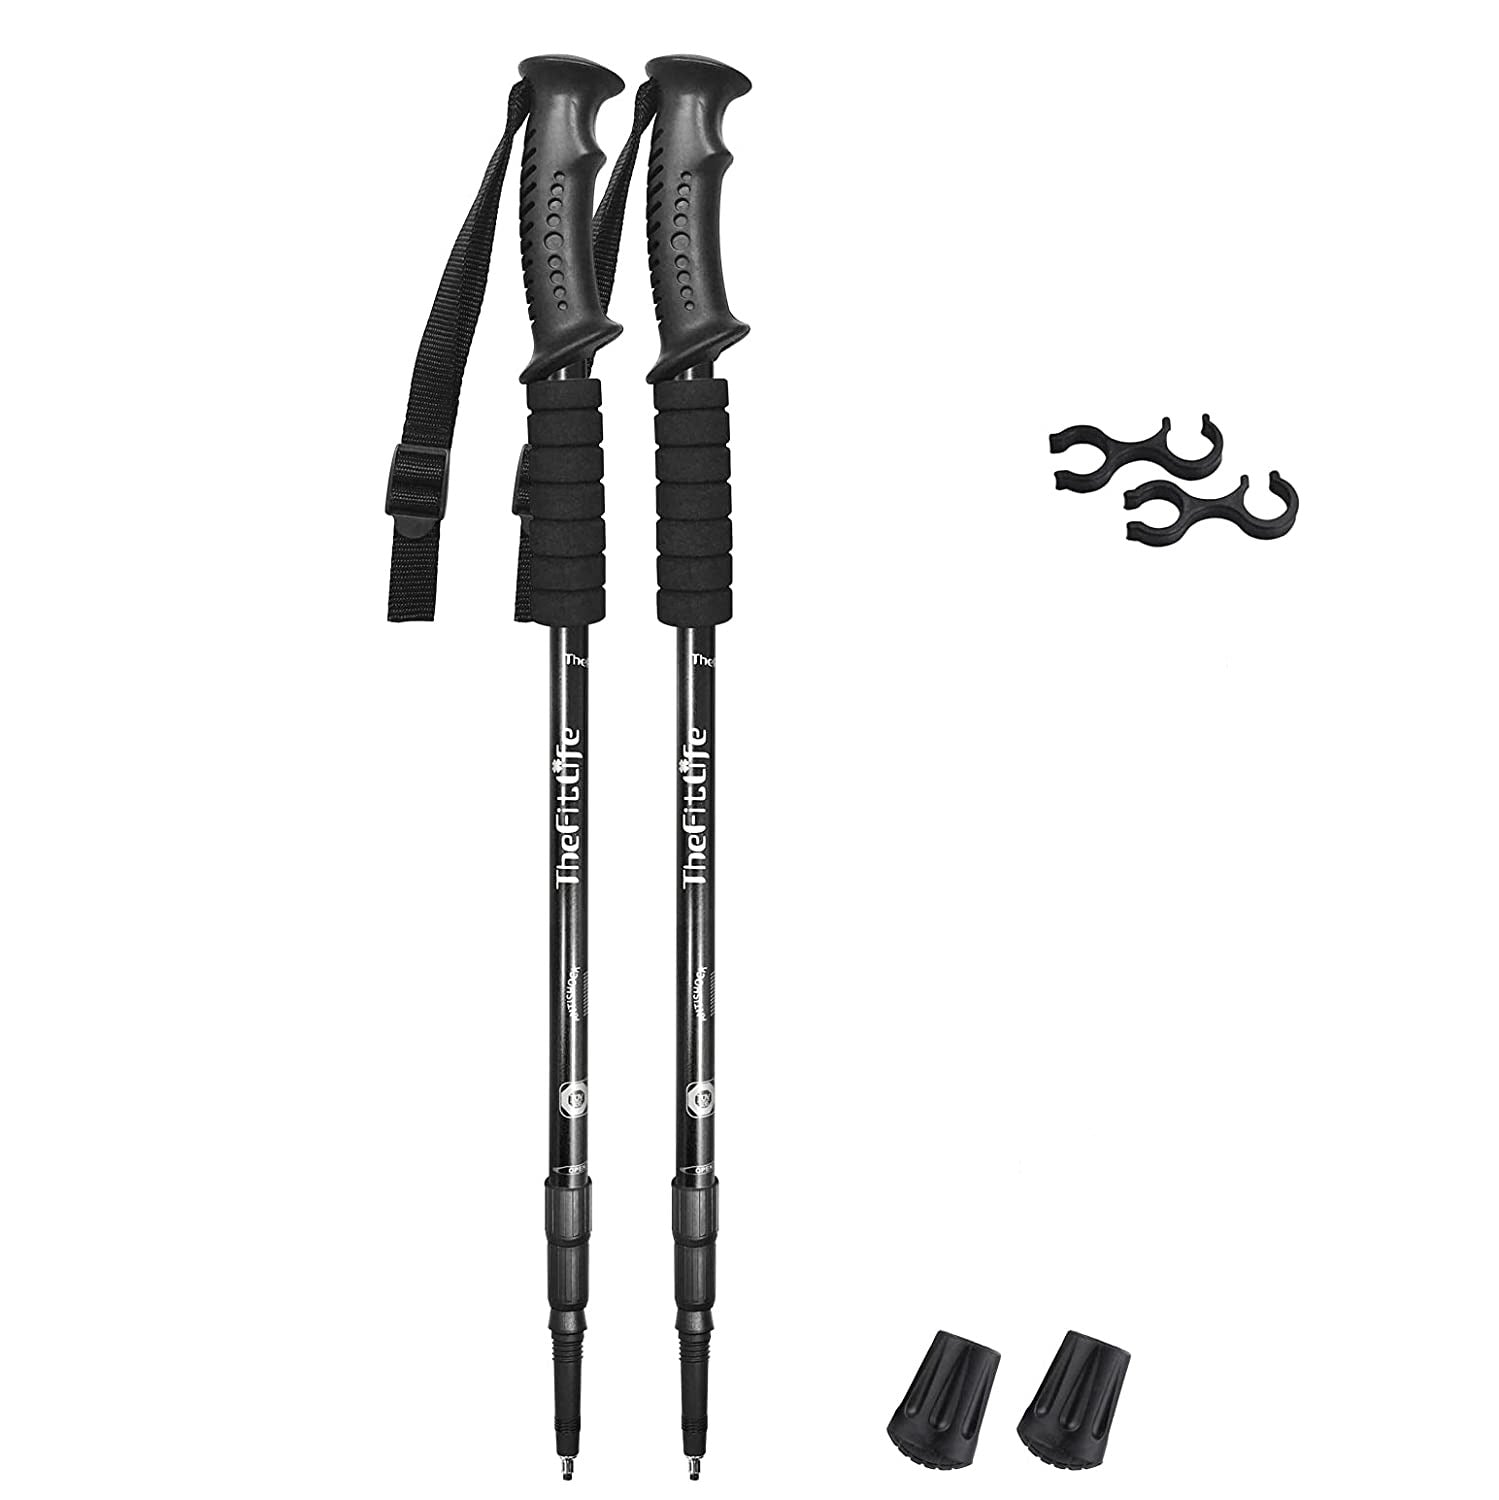 TheFitLife Nordic Walking Trekking Poles With Antishock And Quick Lock.